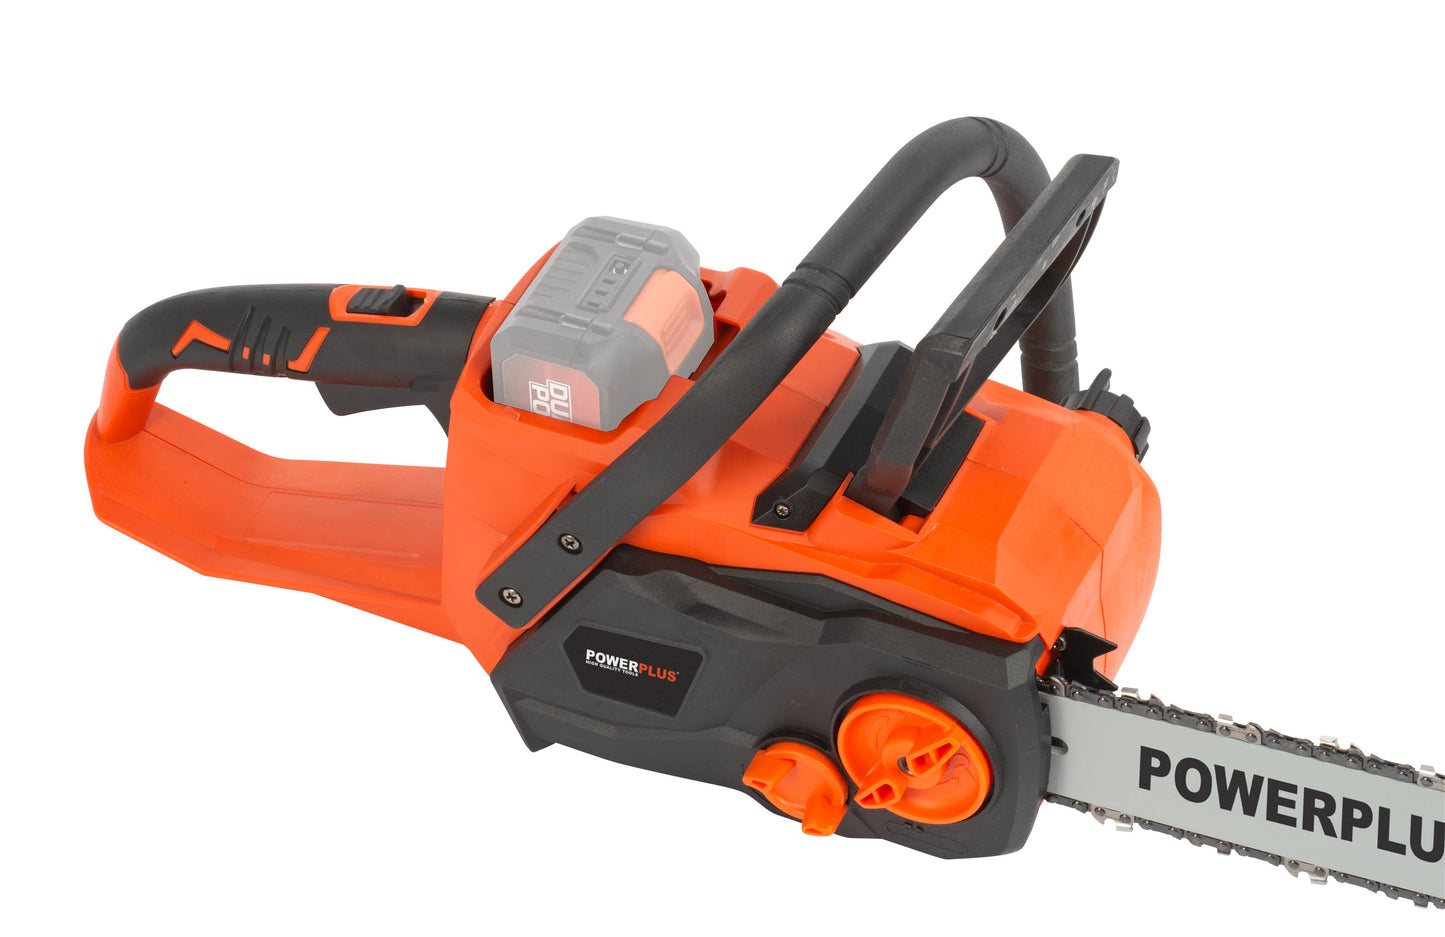 Dual Power - 40V Cordless Chainsaw Brushless - 350mm (unit only)